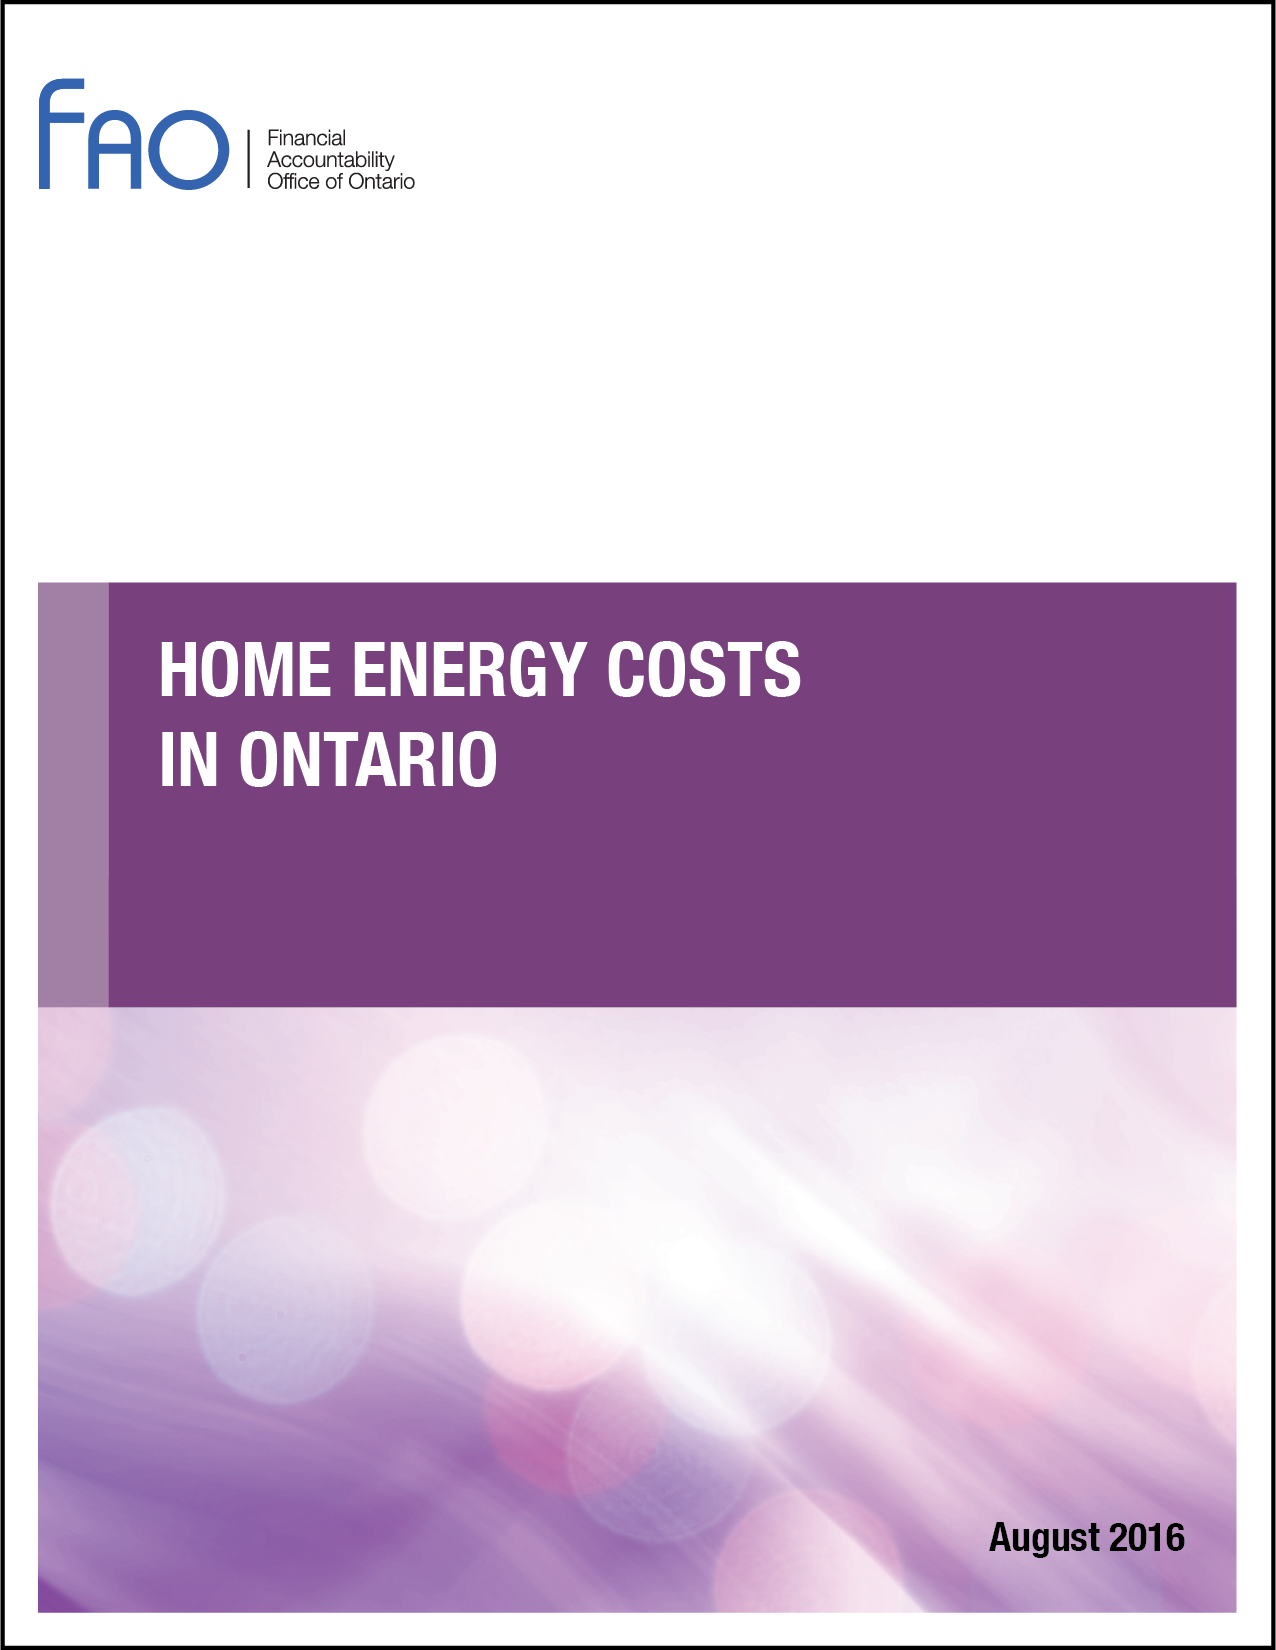 Home Energy Costs in Ontario